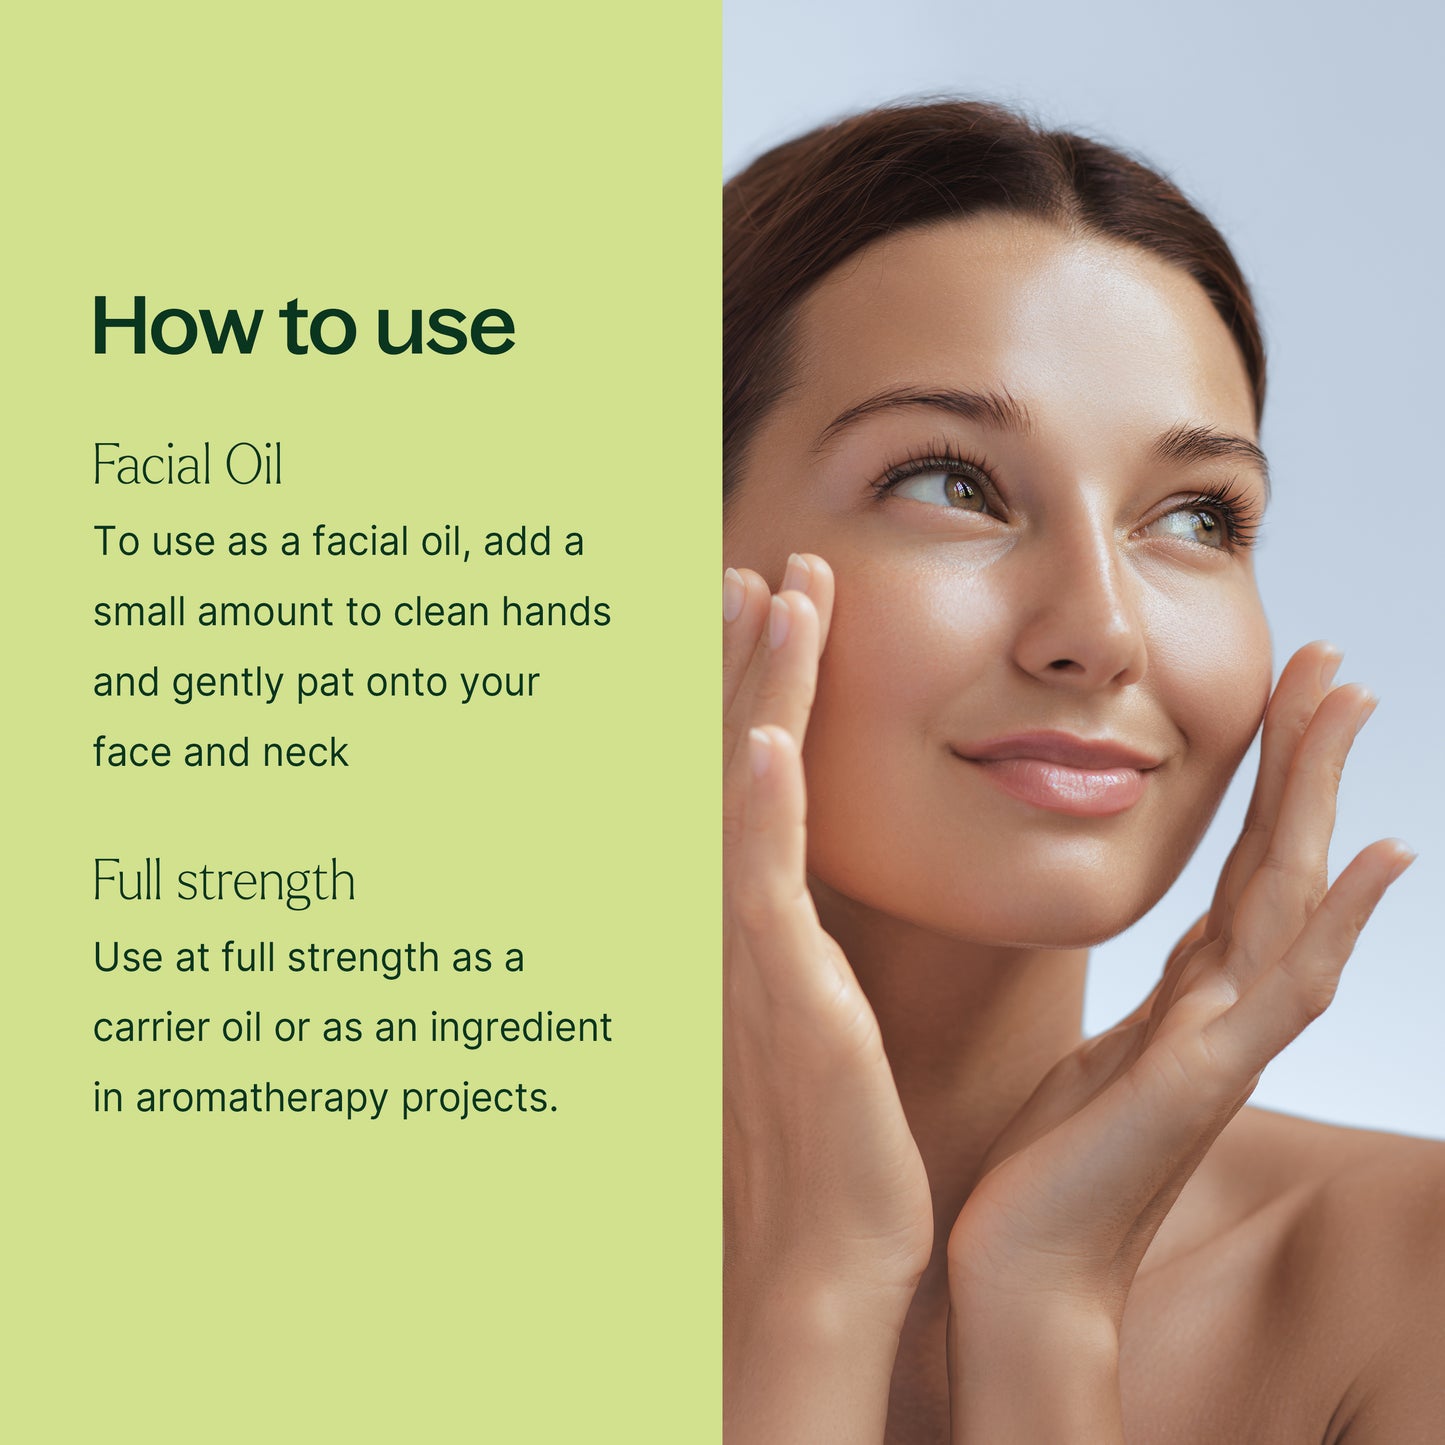 How to use: To use as facial oil, add a small amount to clean hands and gently pat onto your face and neck. Use at full strength as a carrier oil or as an ingredient in aromatherapy projects.